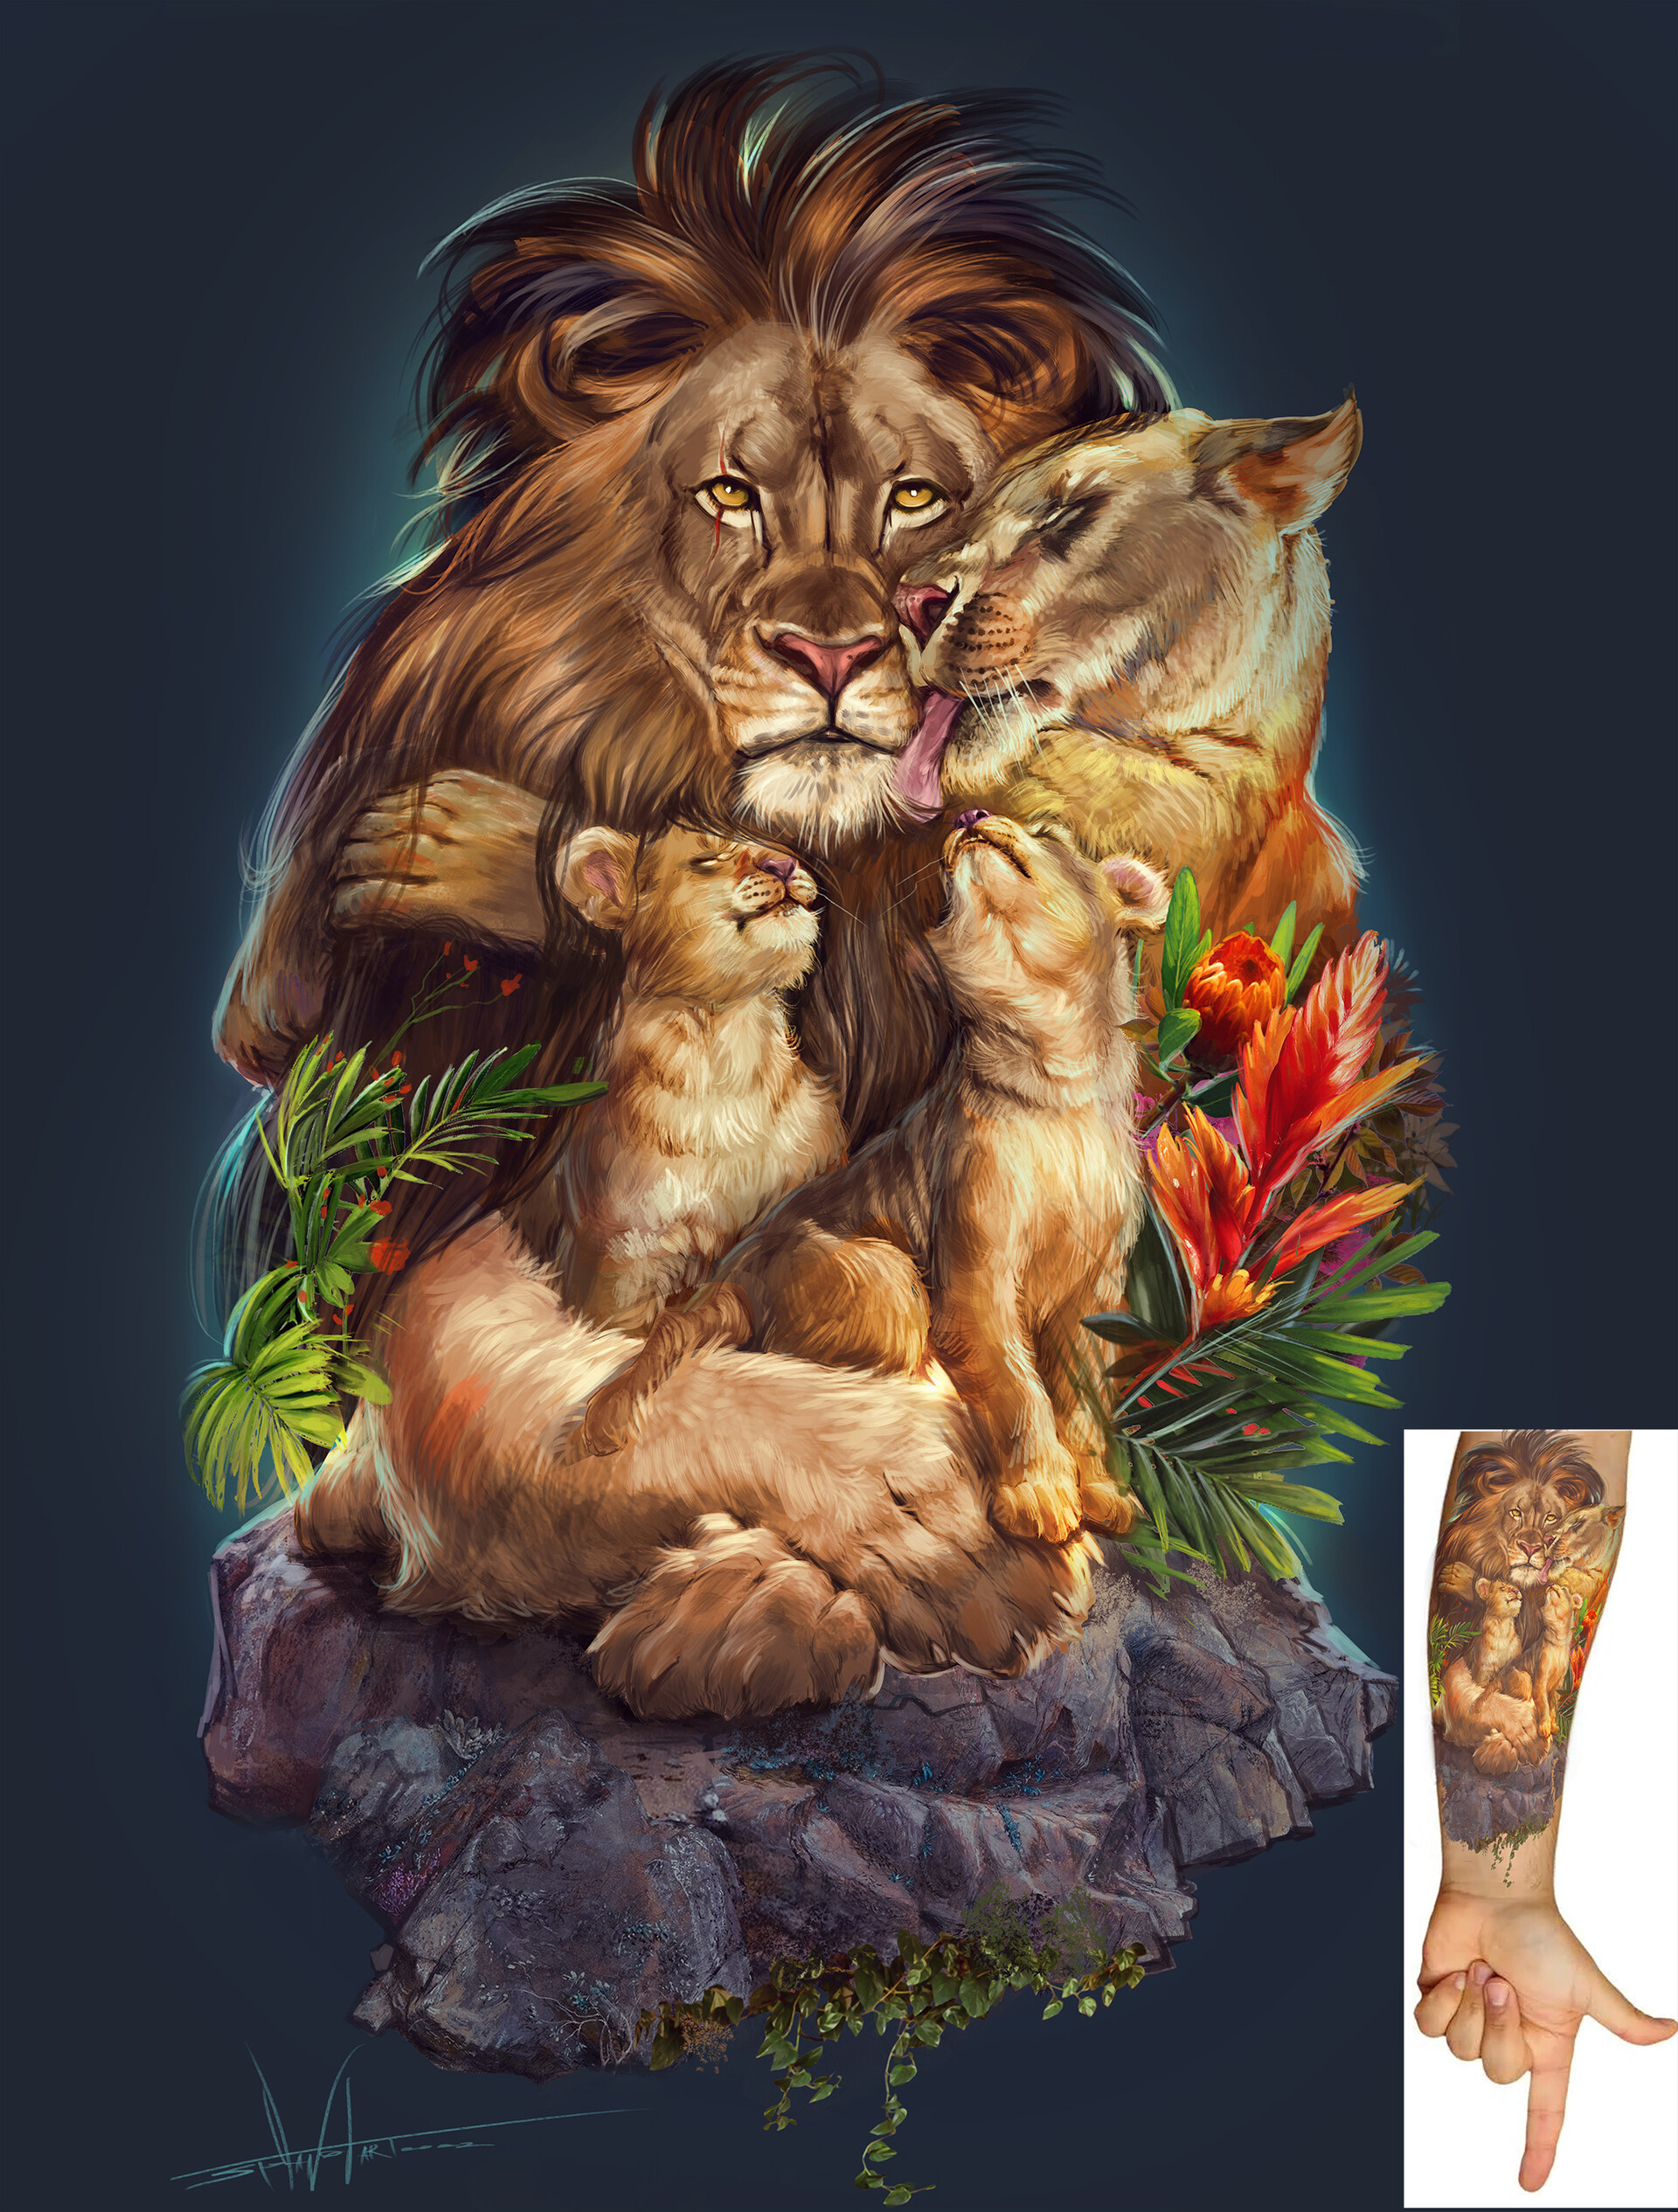 Art on Tumblr: Amazing lion family script outer tattoo sleeve by awesome  artist Jeffry Mendoza @mendozajeffry !